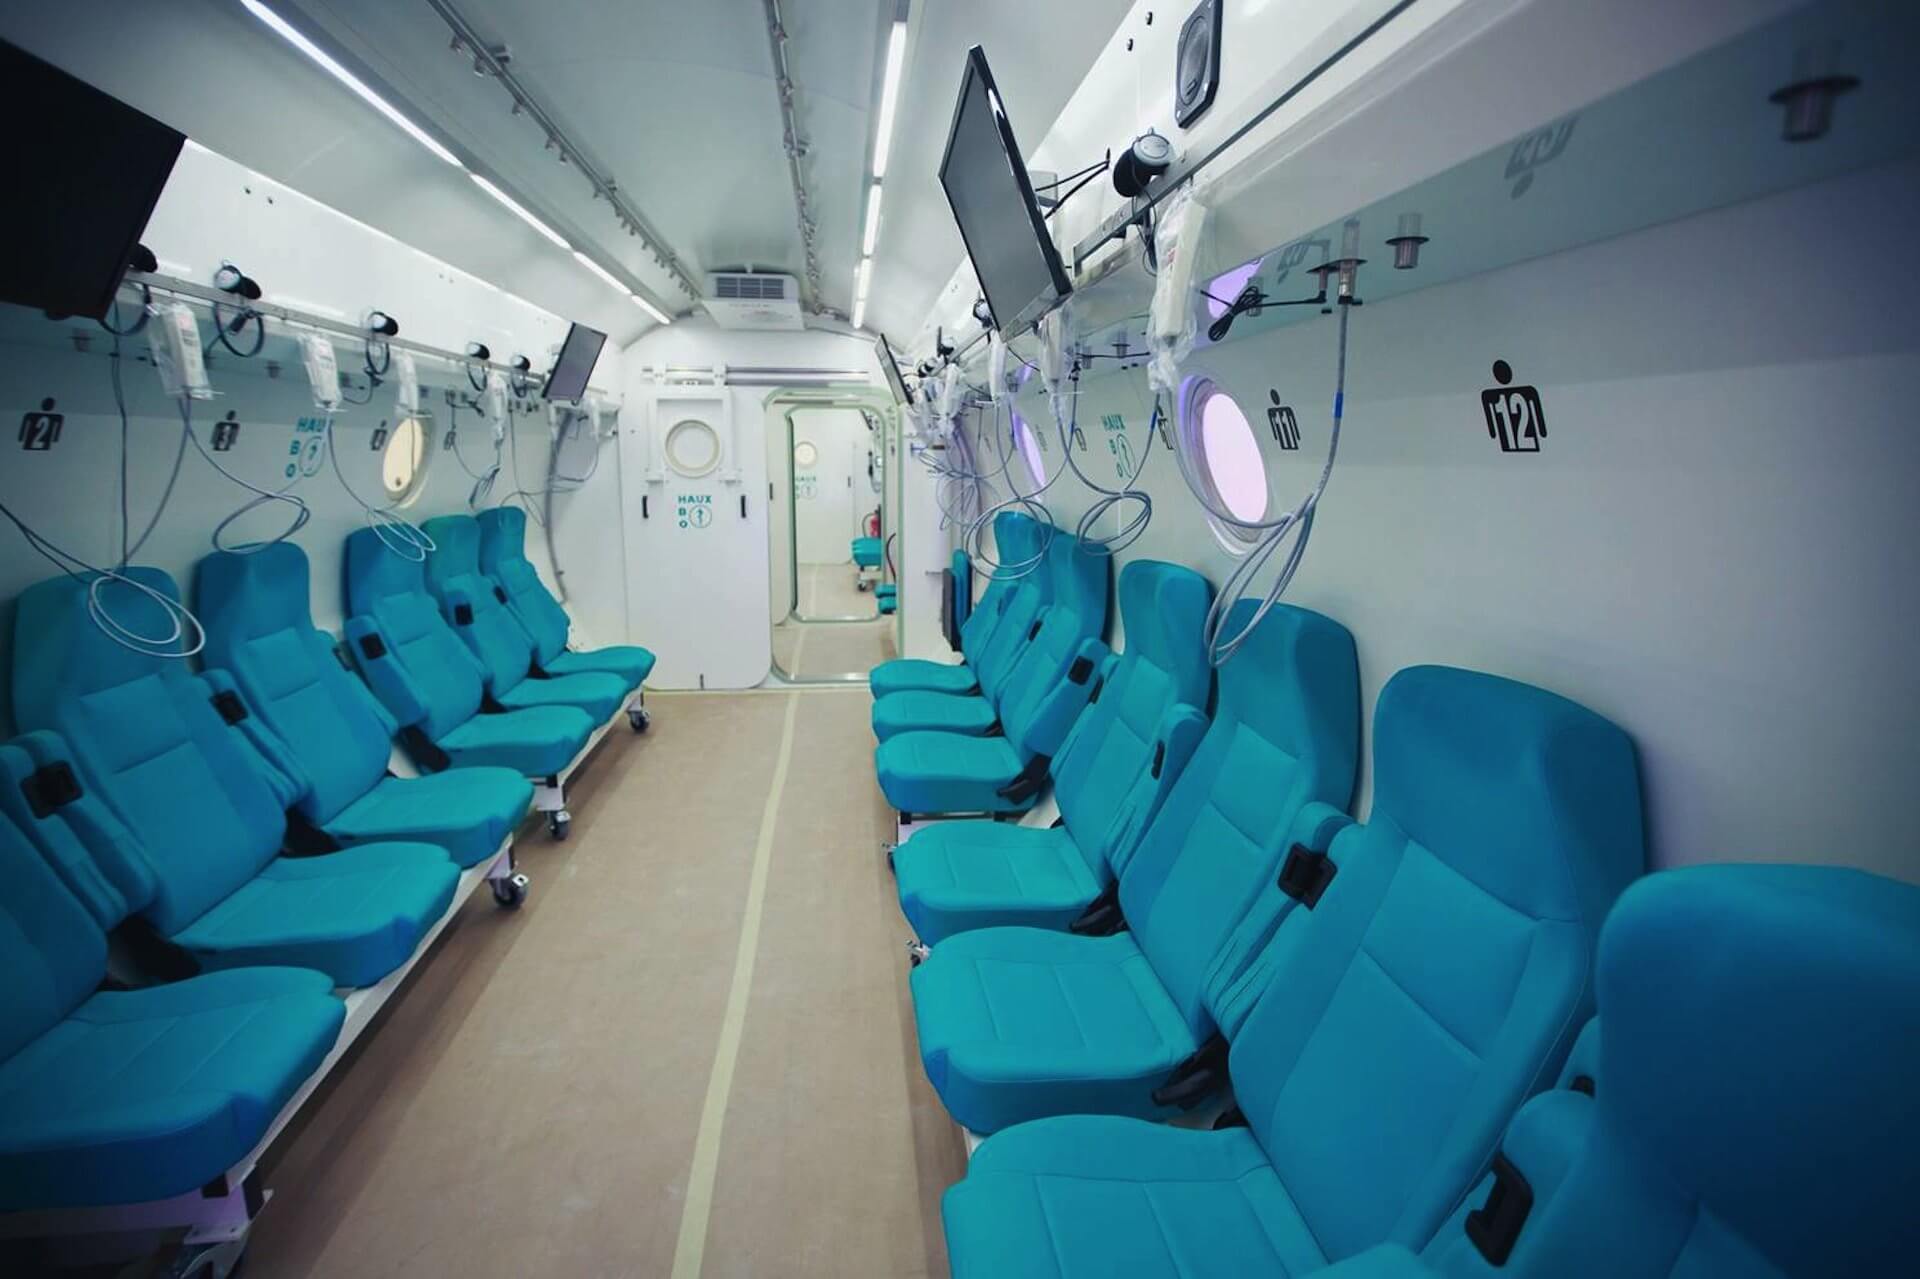 The interior of a hyperbaric chamber at the Sagol Center for Hyperbaric Medicine and Research in Israel, used to treat patients with fibromyalgia in a recent trial. A new study showed patients who completed a two-month regimen of treatment experienced significant improvements in their health. (Credit: Sagol Center for Hyperbaric Medicine and Research)